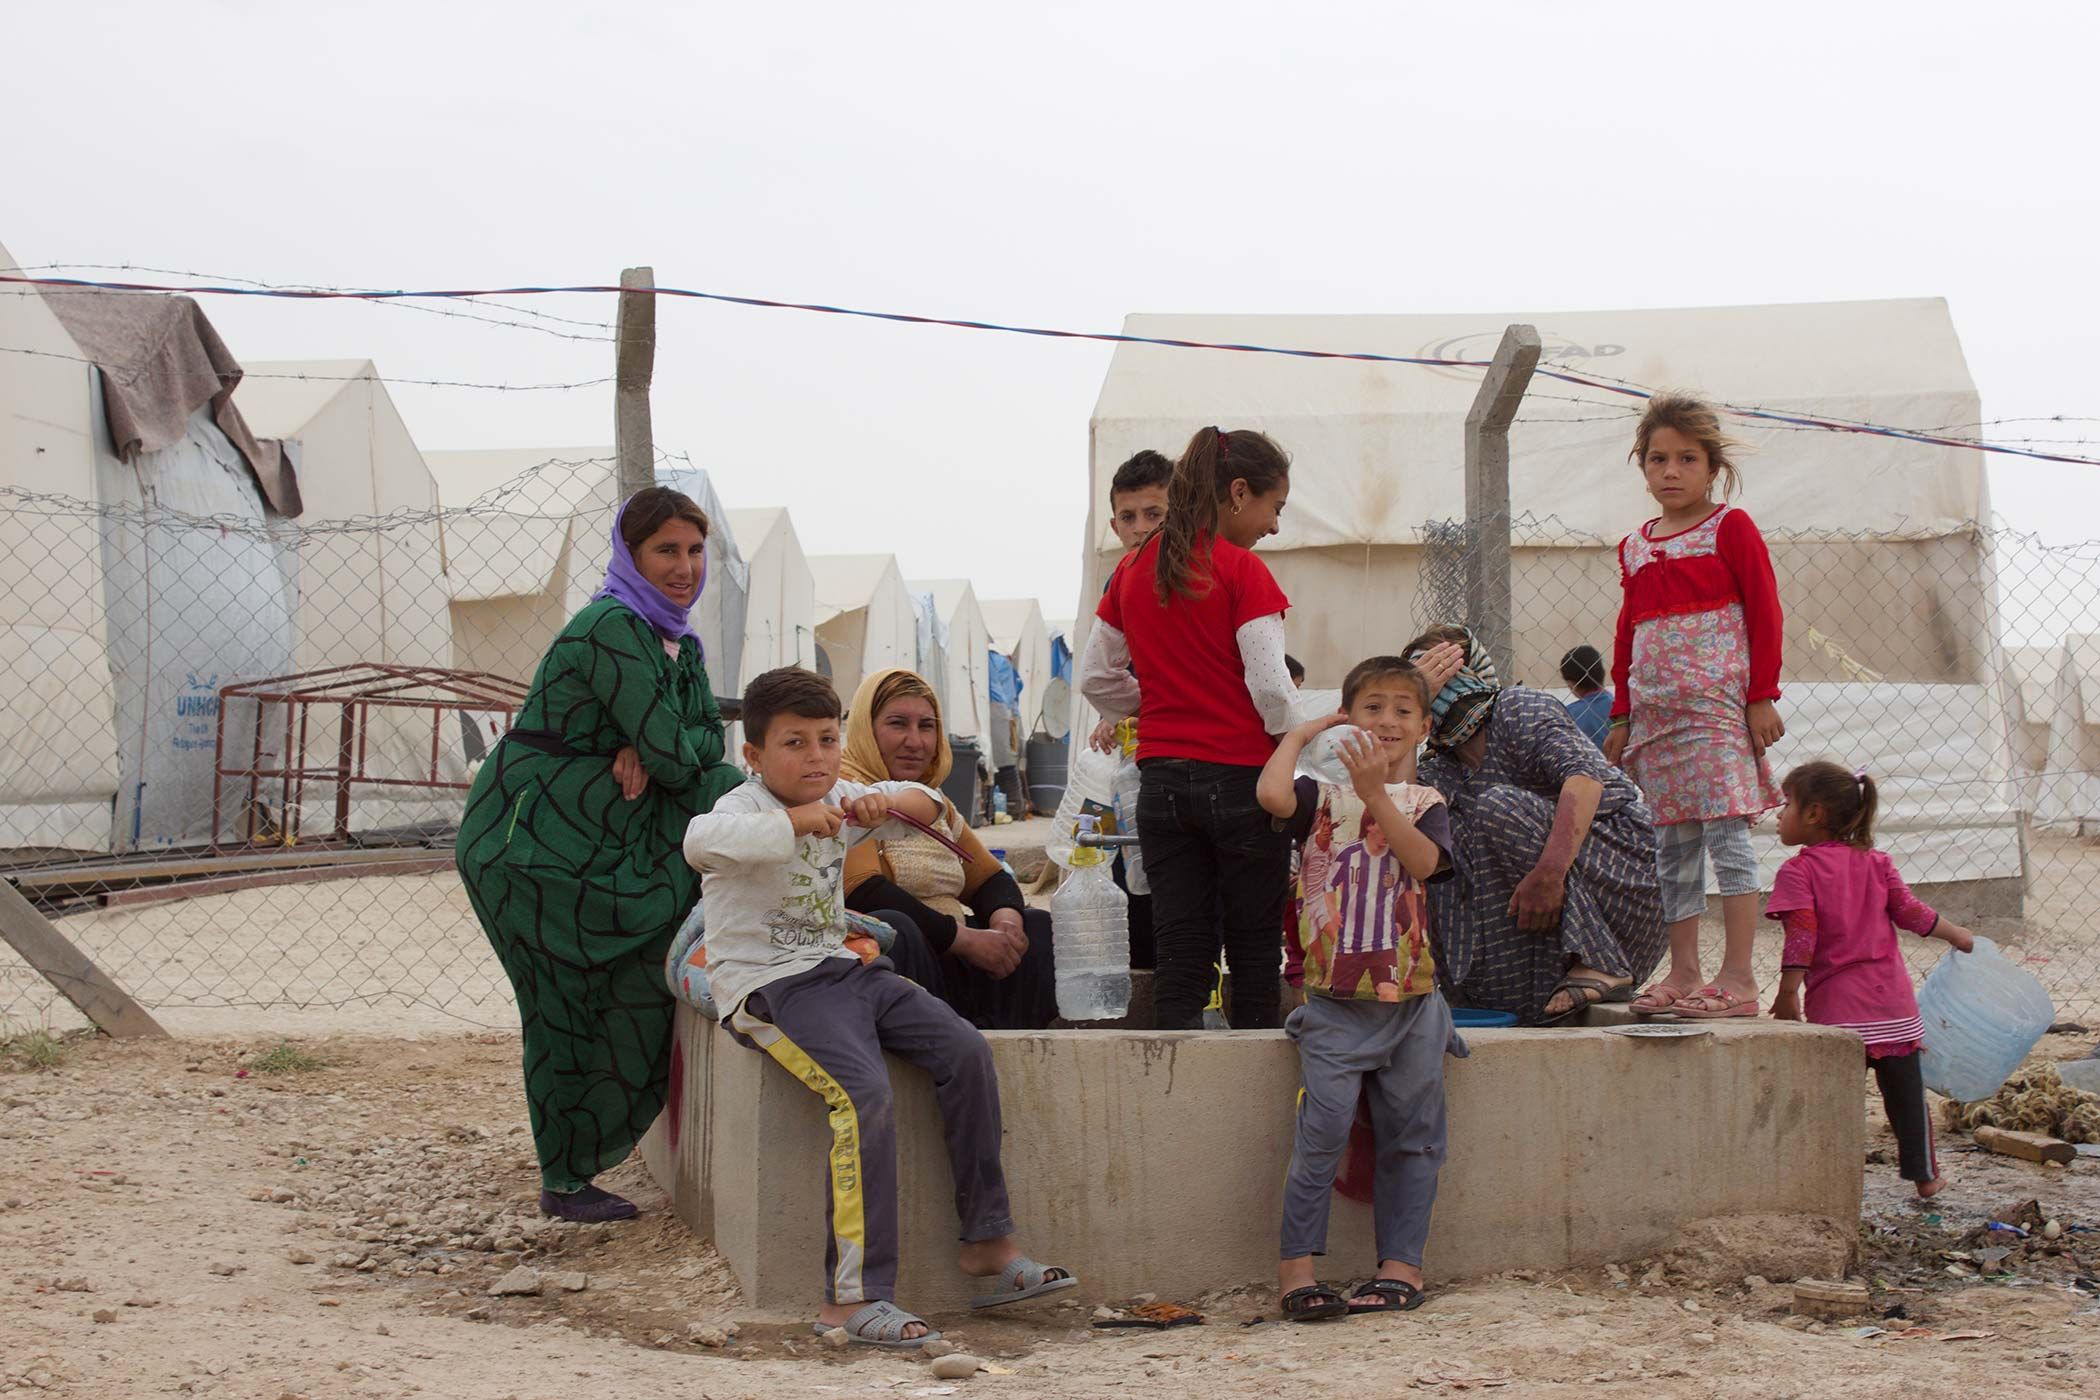 One of many camps for internally displaced people in Iraq. Forced to flee their homes when ISIS advanced on their villages in 2014, most Yazidis from the Sinjar region of Iraq remain in camps. Image by Emily Feldman. Iraq, 2015.